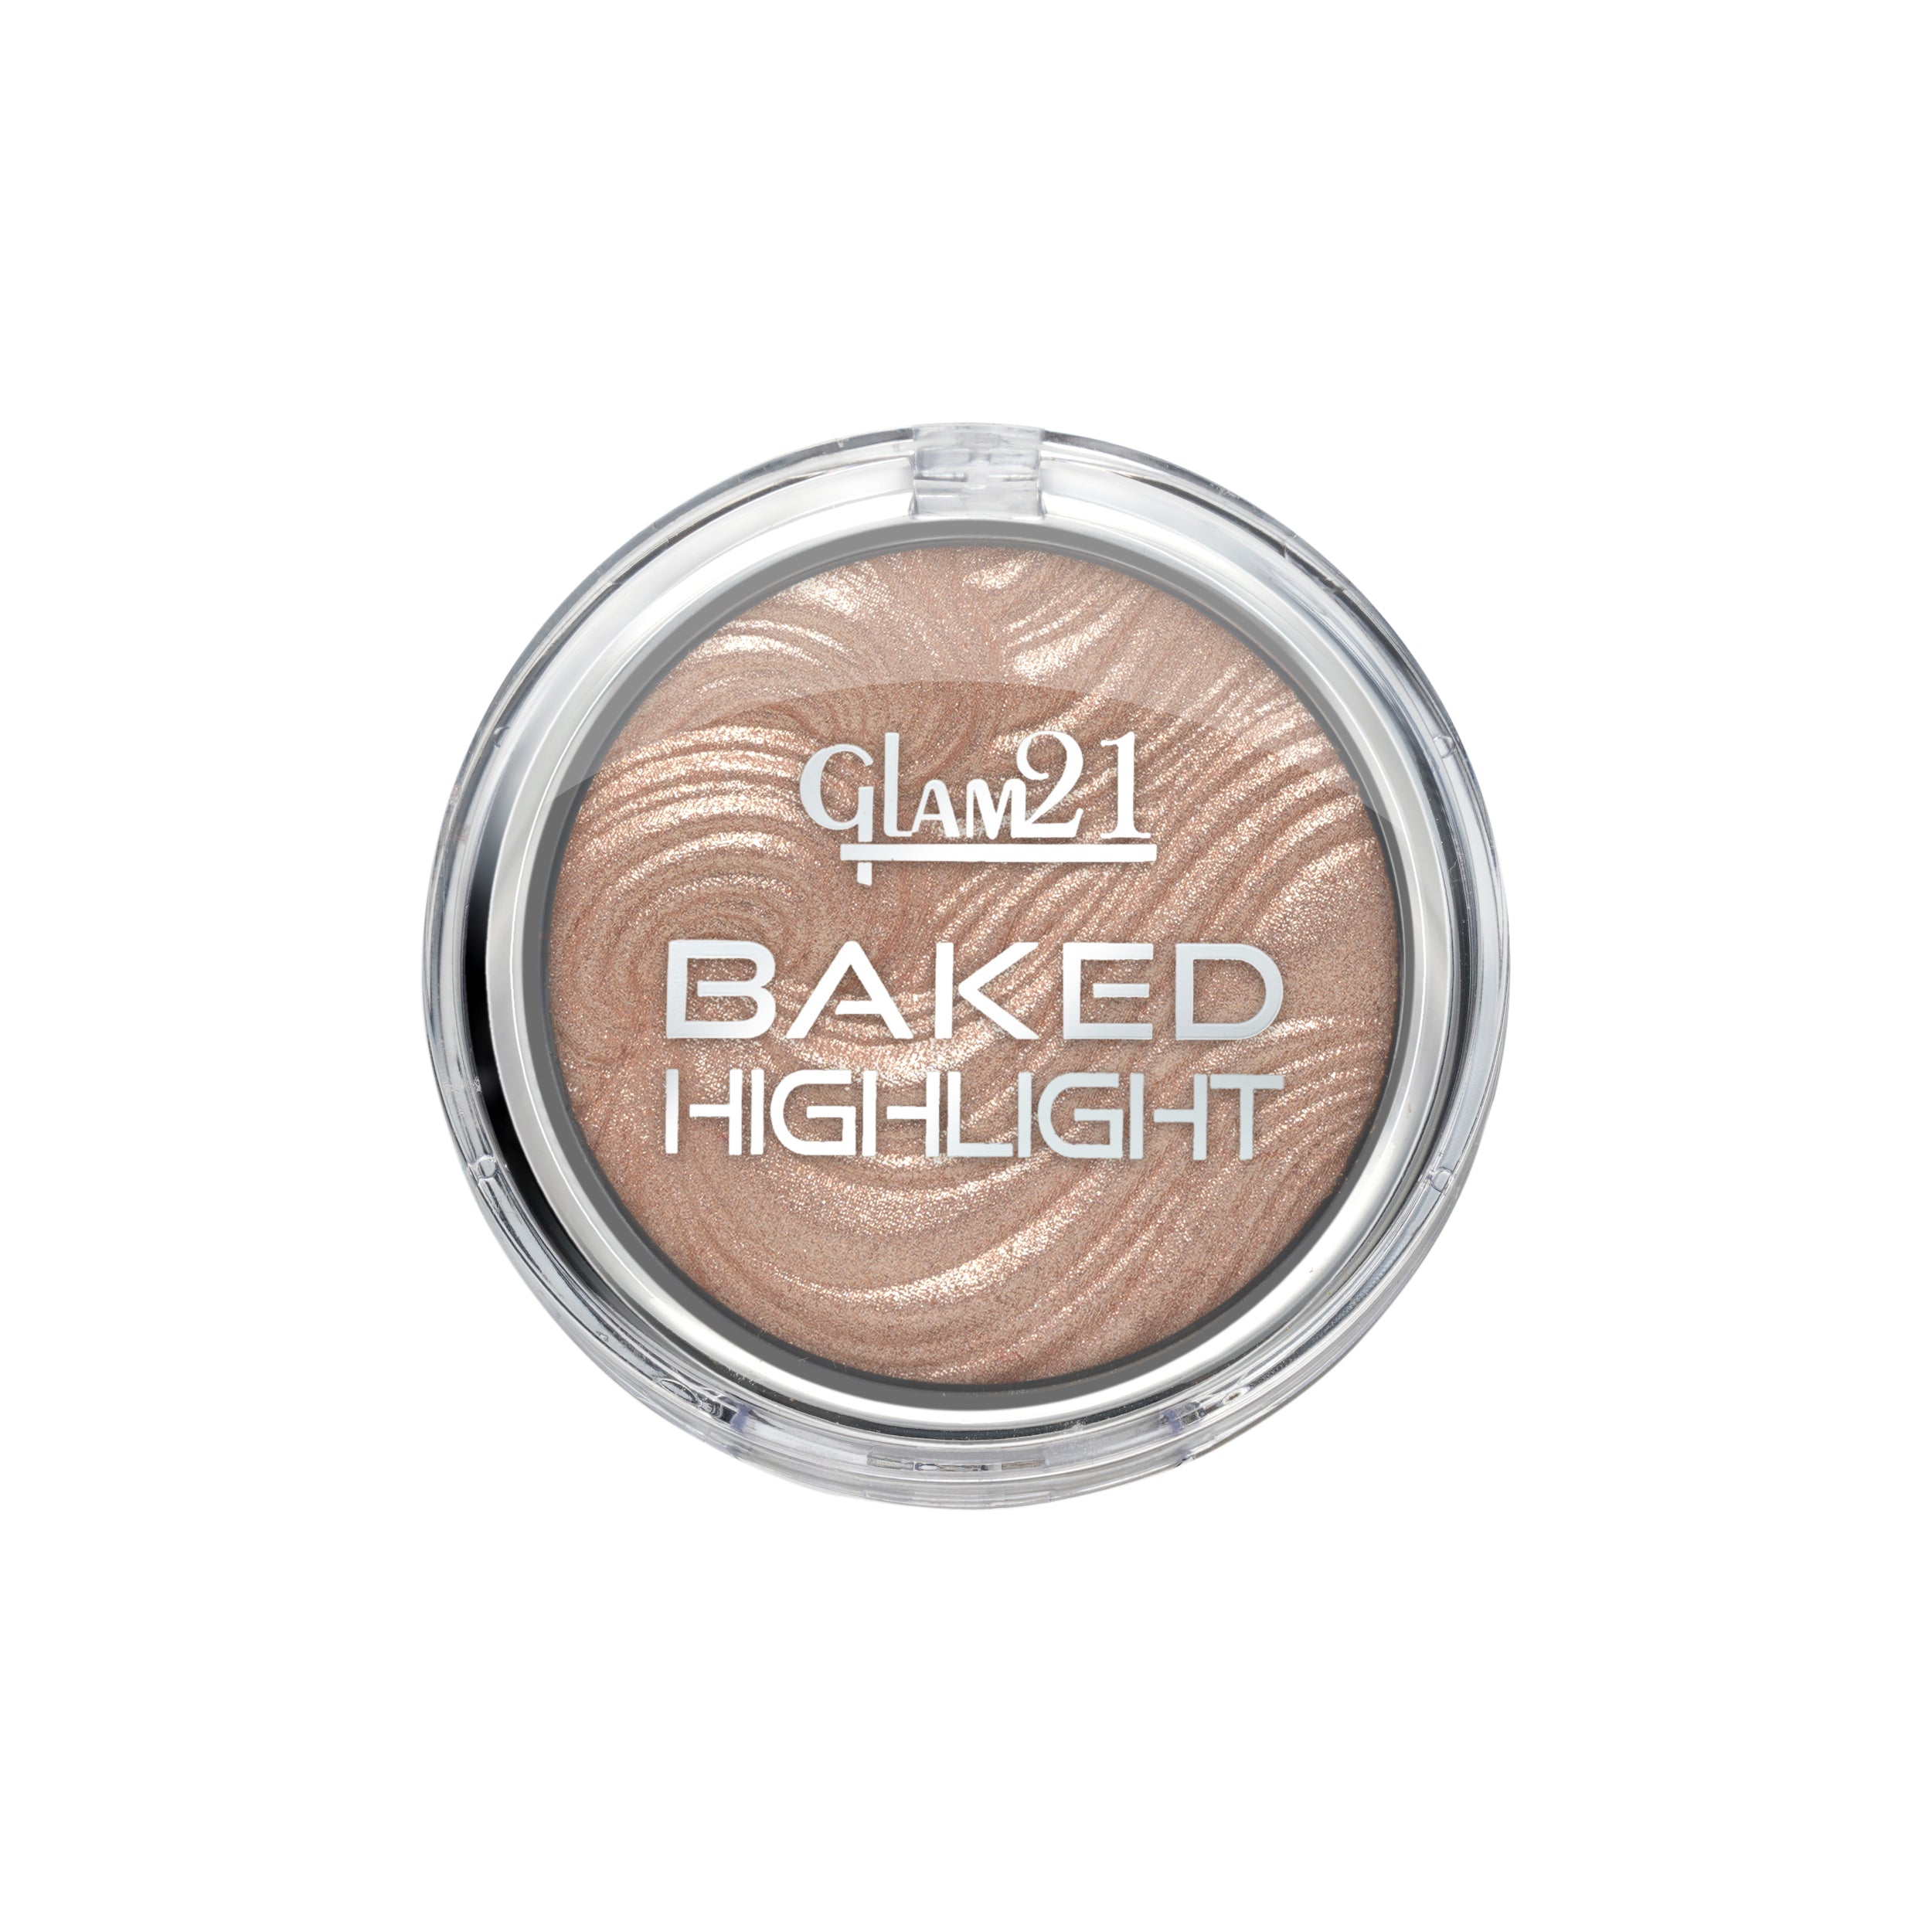 Glam21 Baked Highlighter with Silky Pigments Shimmer Look & Longlasting Mettalic Finish Highlighter, 2.8 g (Shade-03)